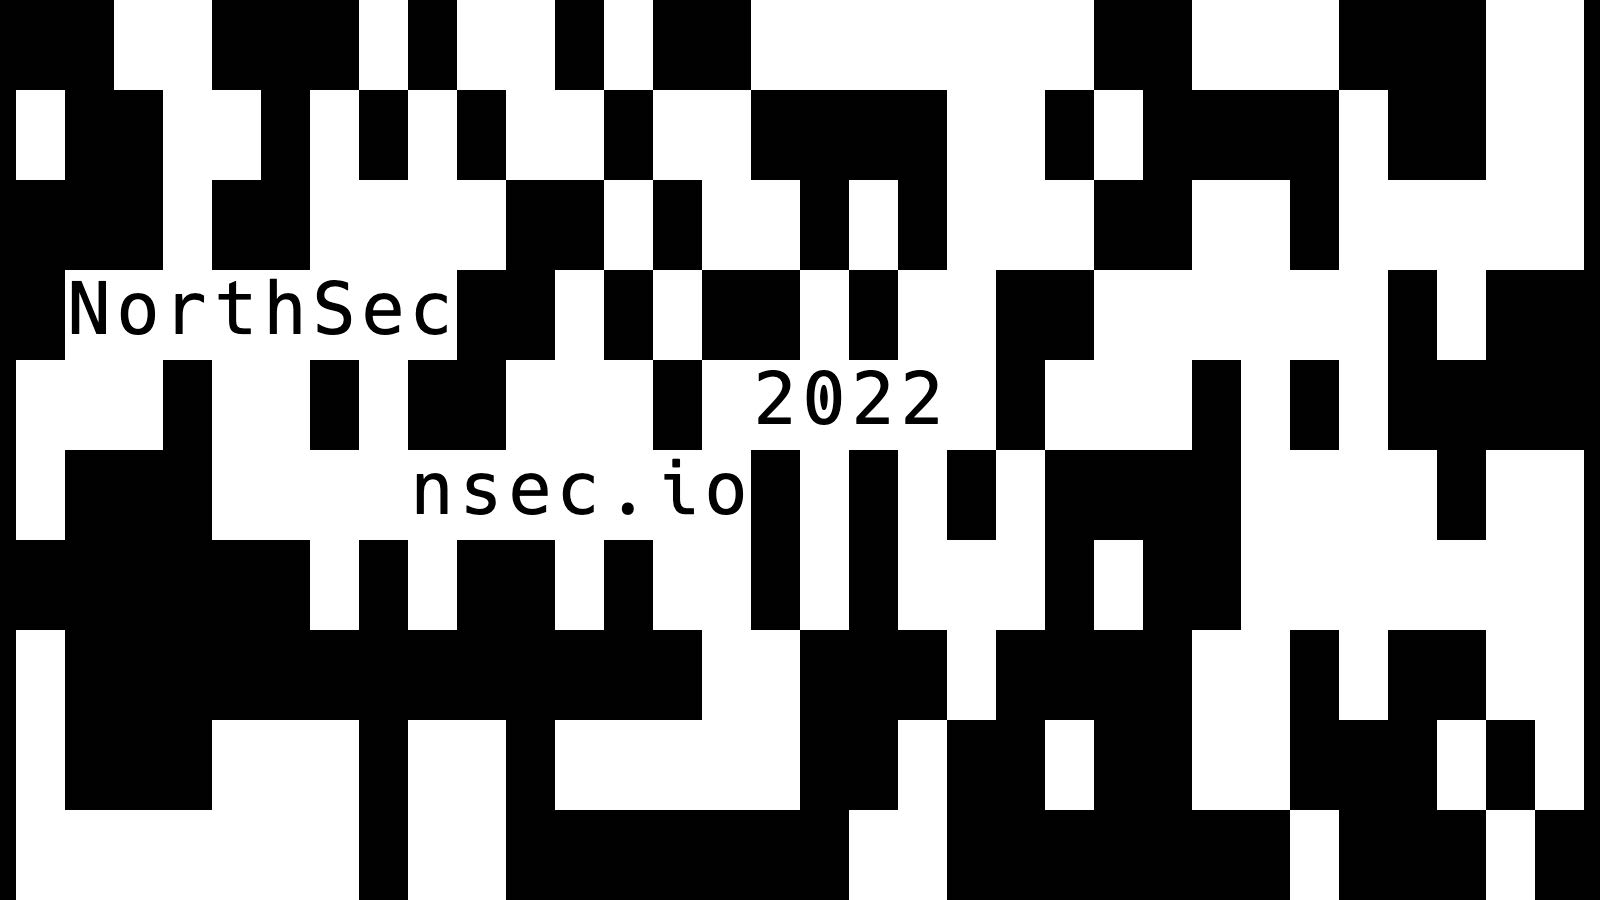                 NorthSec 2022 Projections 

                I was commisioned to design projections for the annual                  NorthSec cyberse